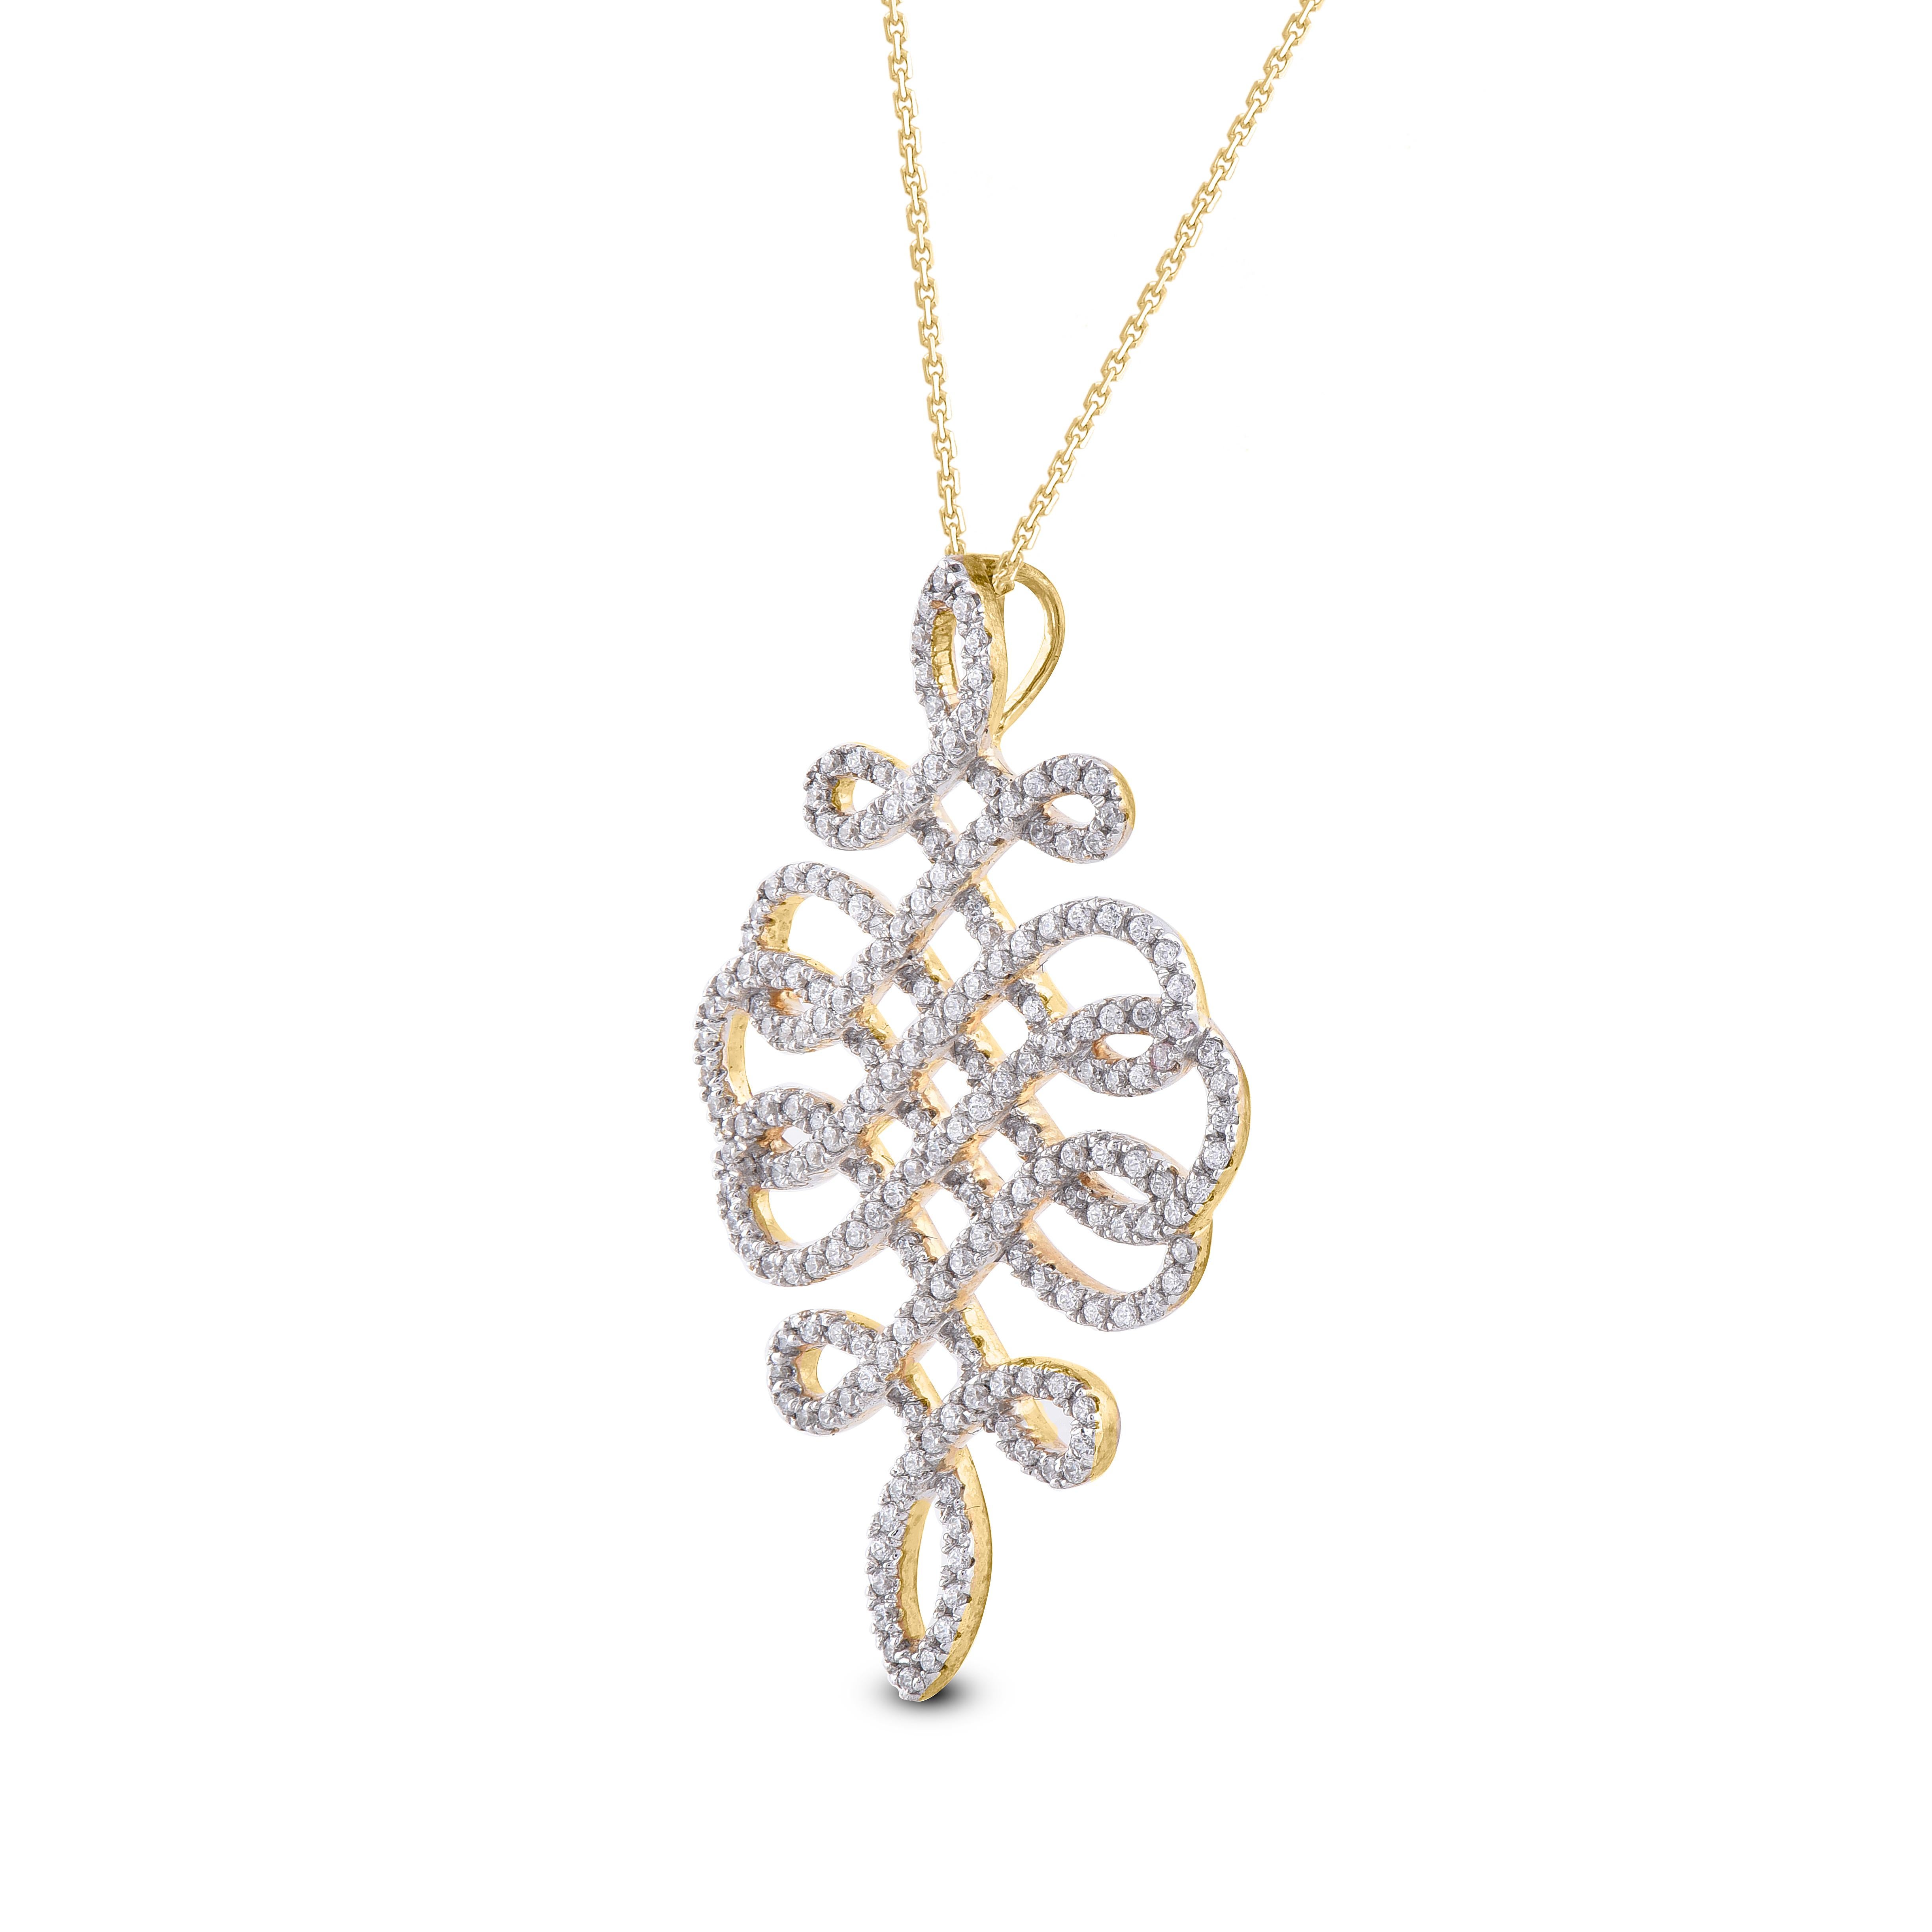 Round Natural Diamond Entangled pendant adds a touch to sophistication to your style with this 14 Karat Yellow Gold. This ring features 192 Round White Diamonds HI colour I2 clarity set in micro-pave setting a beautiful design forming a unique